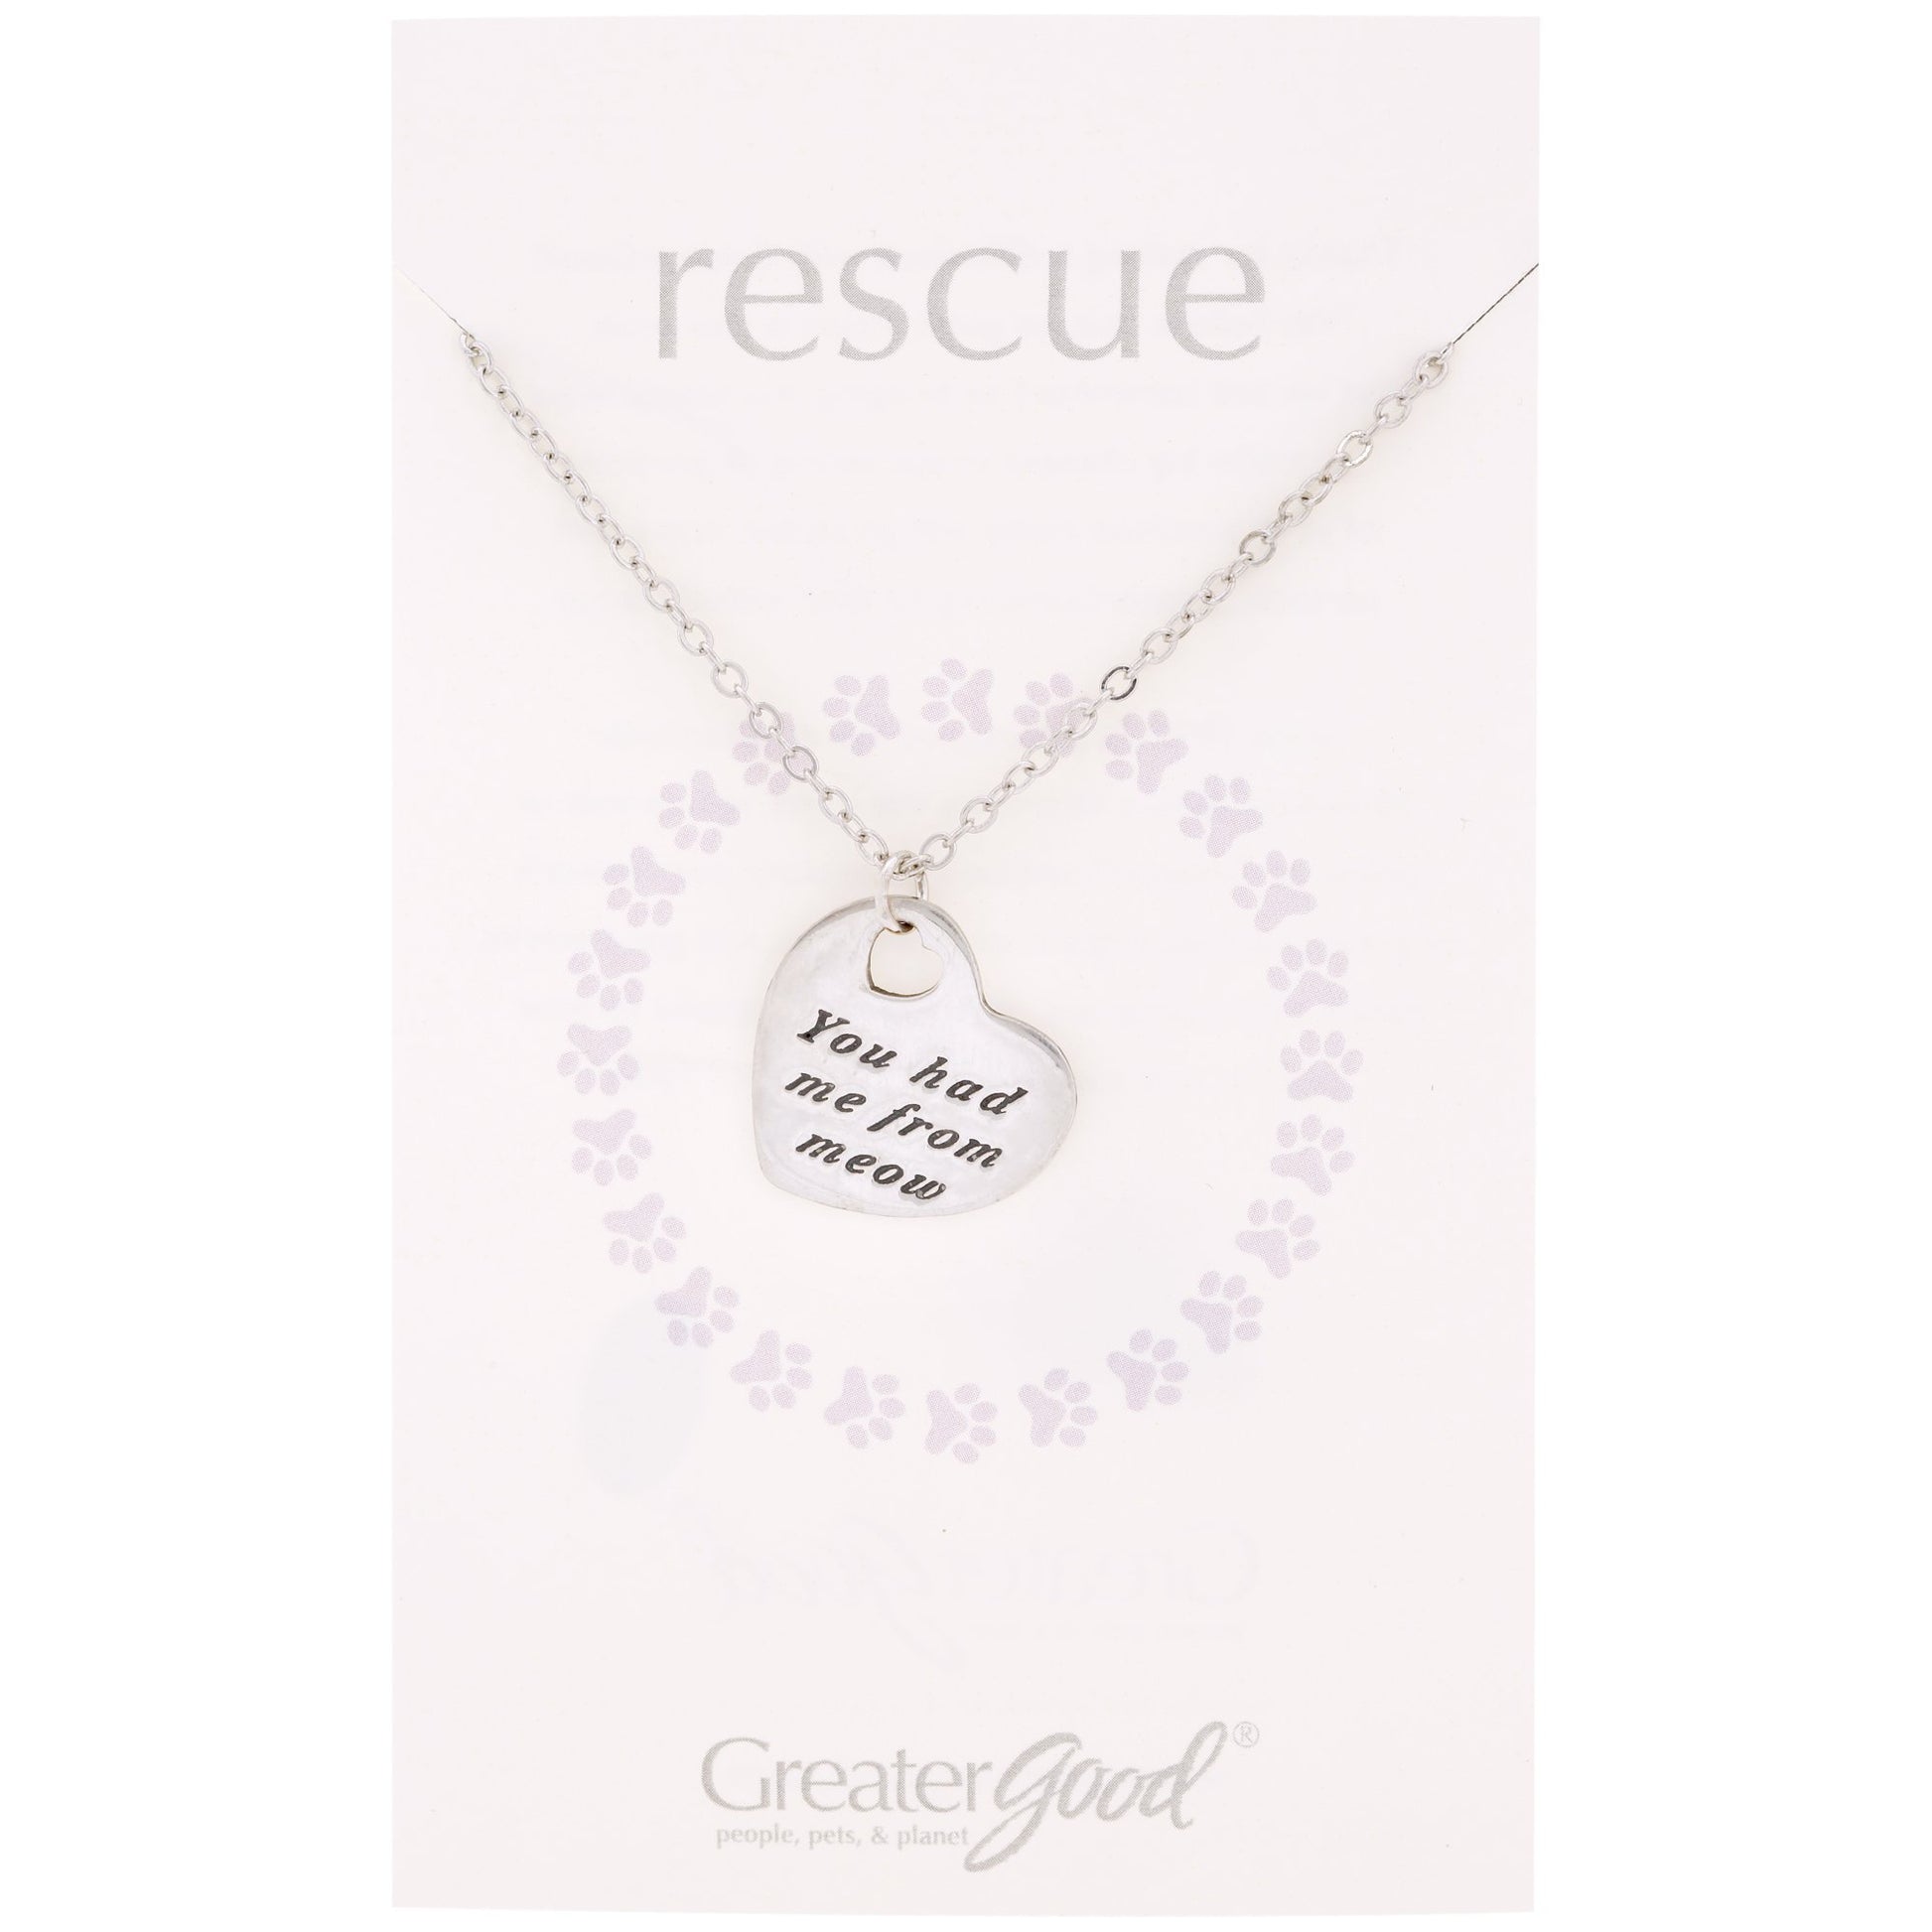 PROMO - You Had Me From Meow Pewter Heart Necklace